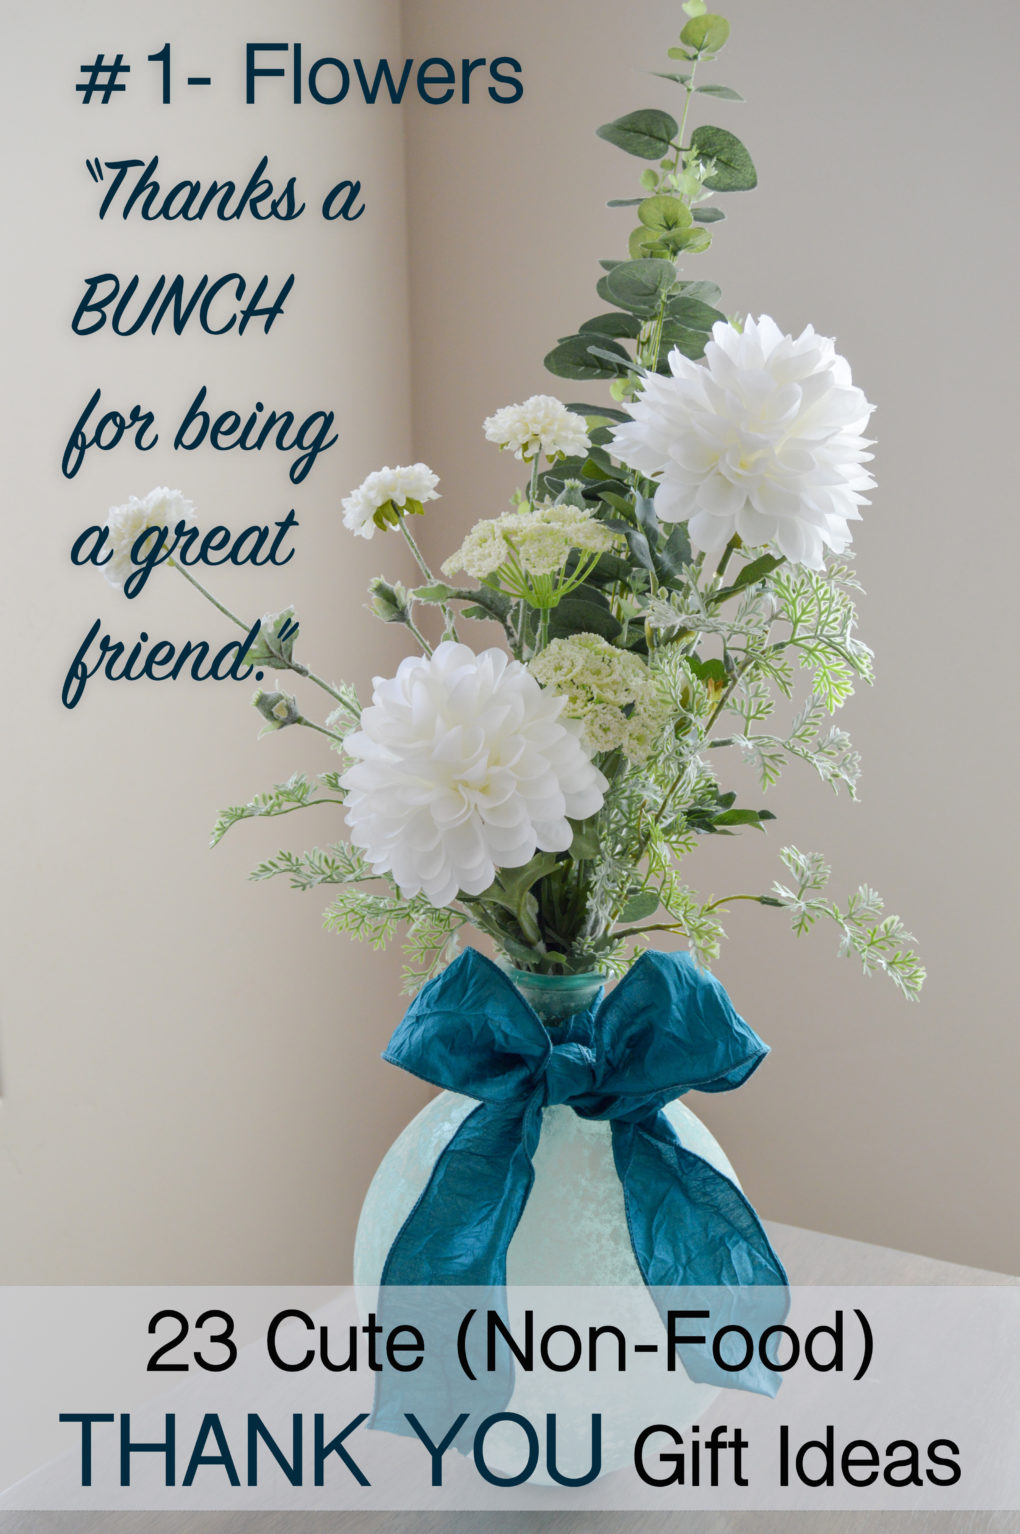 List of 23 cute and creative non-food ways to say thank you. Thank you gift and card ideas that are not food like flowers, candle, necktie, etc. Like this punny flower gift with "Thanks a bunch for being a great friend." Great thank you ideas for a teacher, coworker, neighbor, husband, wife, family member, or anyone who needs a nice thank you gift.